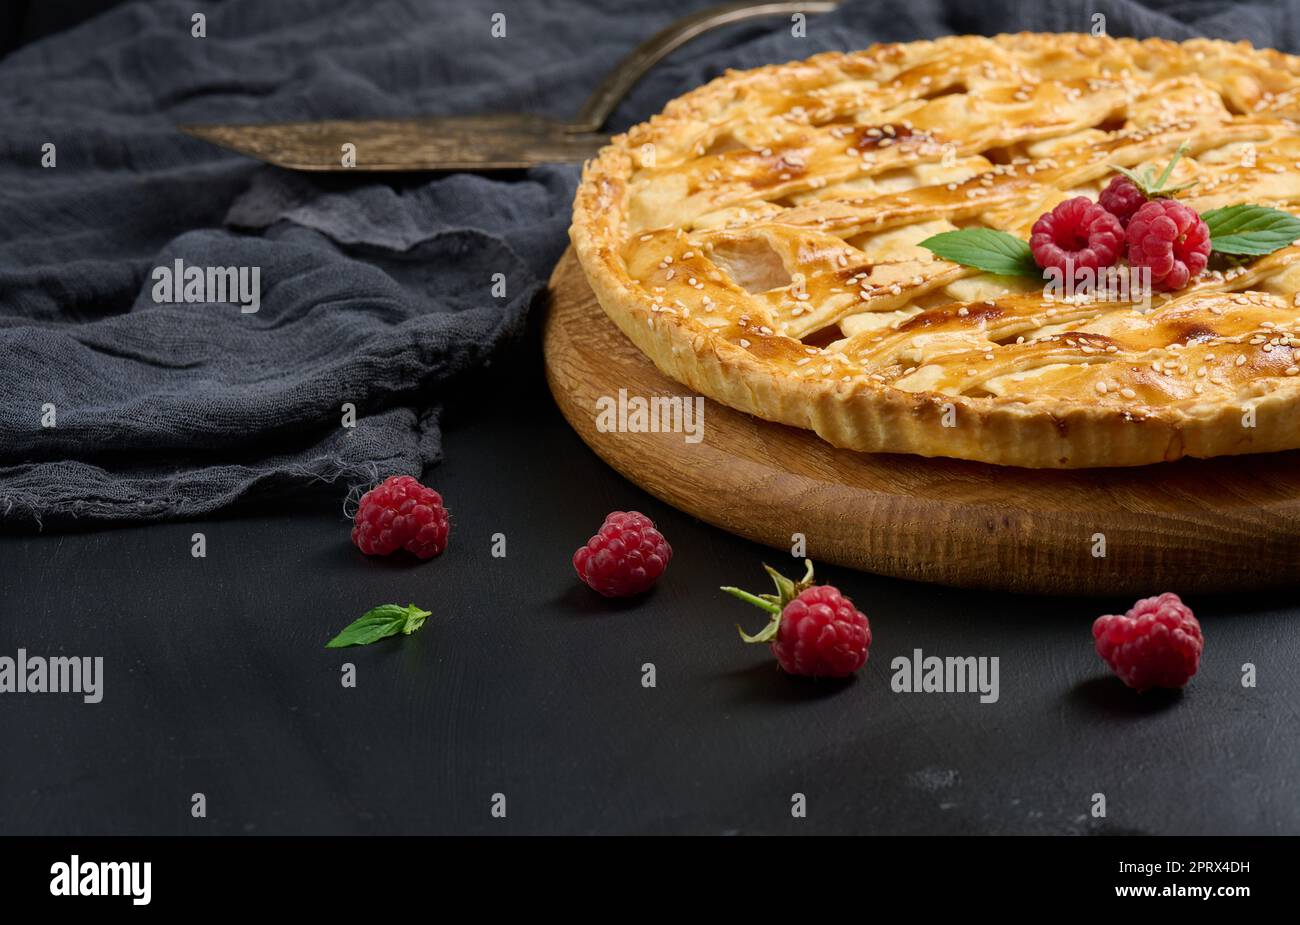 Round baked apple pie on a black table. Stock Photo